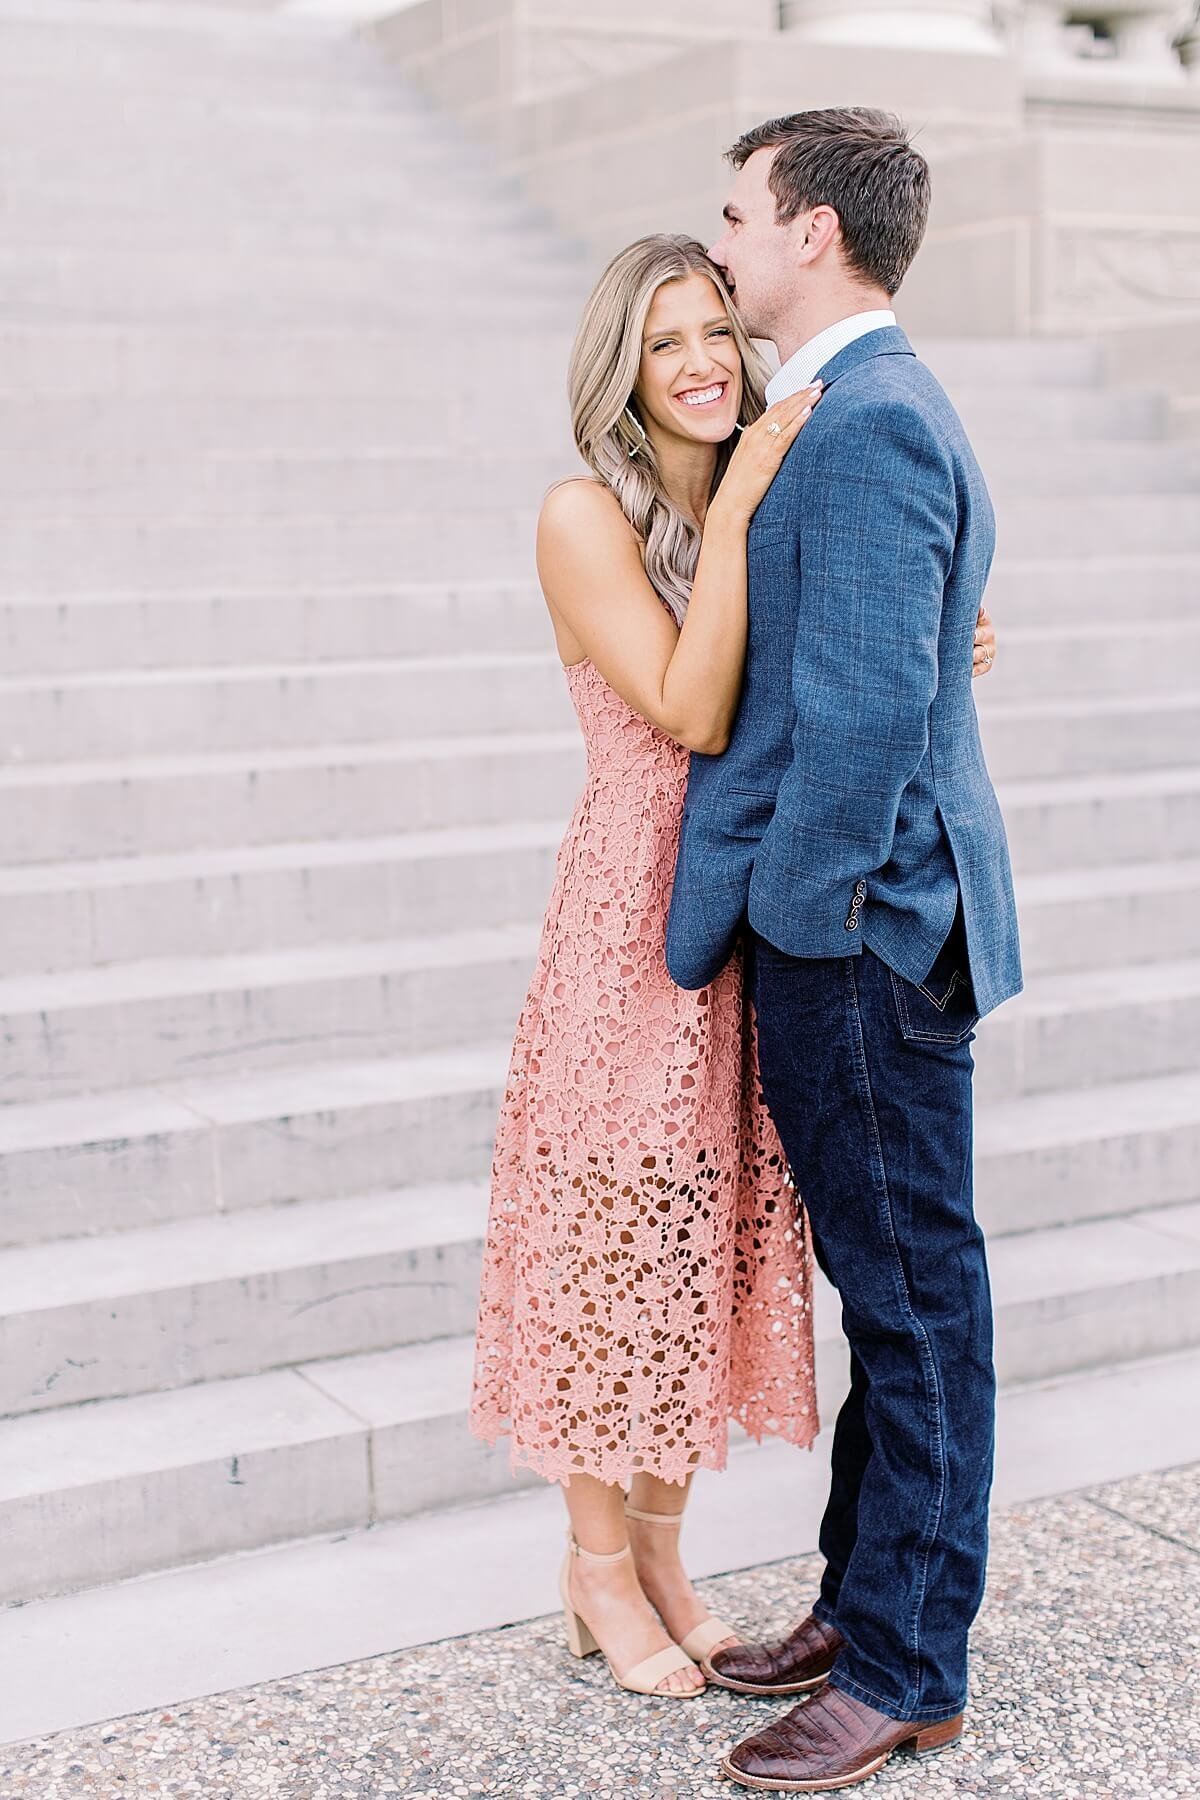 Engagement Session at Texas A&M by Houston Wedding Photographer Alicia Yarrish Photography_0028